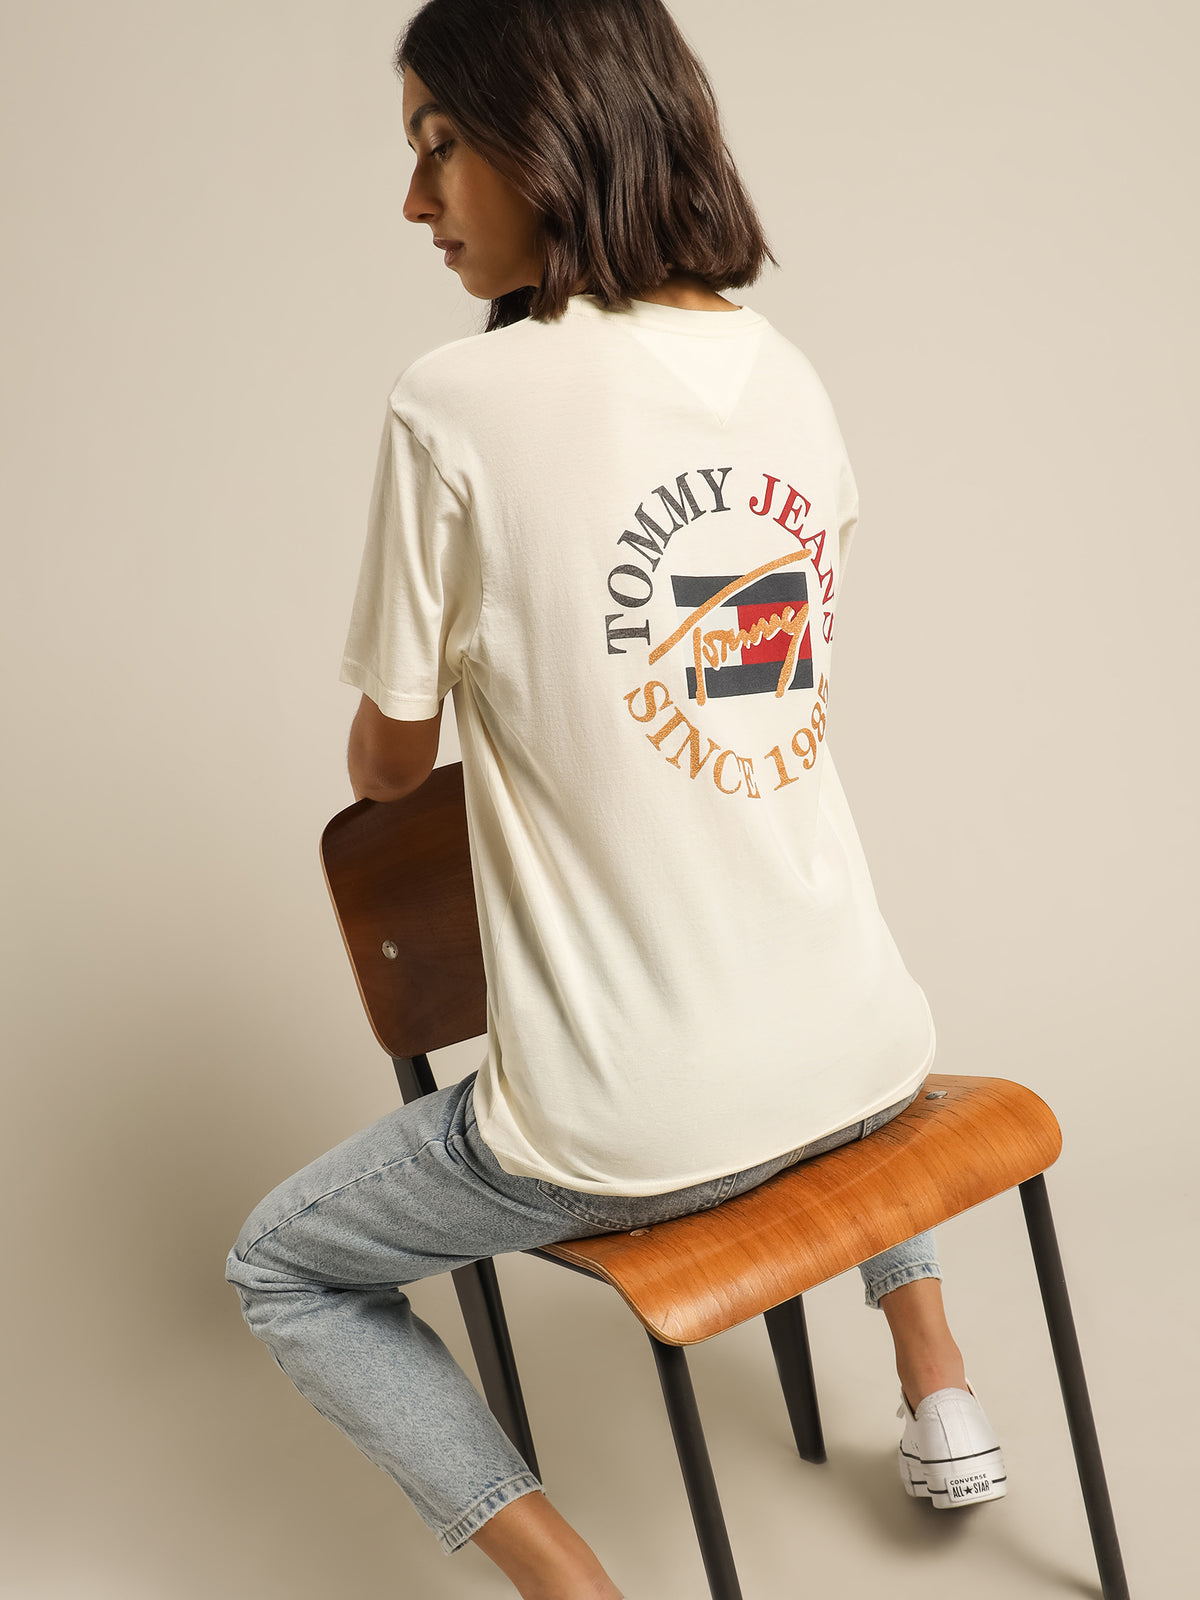 Relaxed Vintage Bronze T-Shirt in White